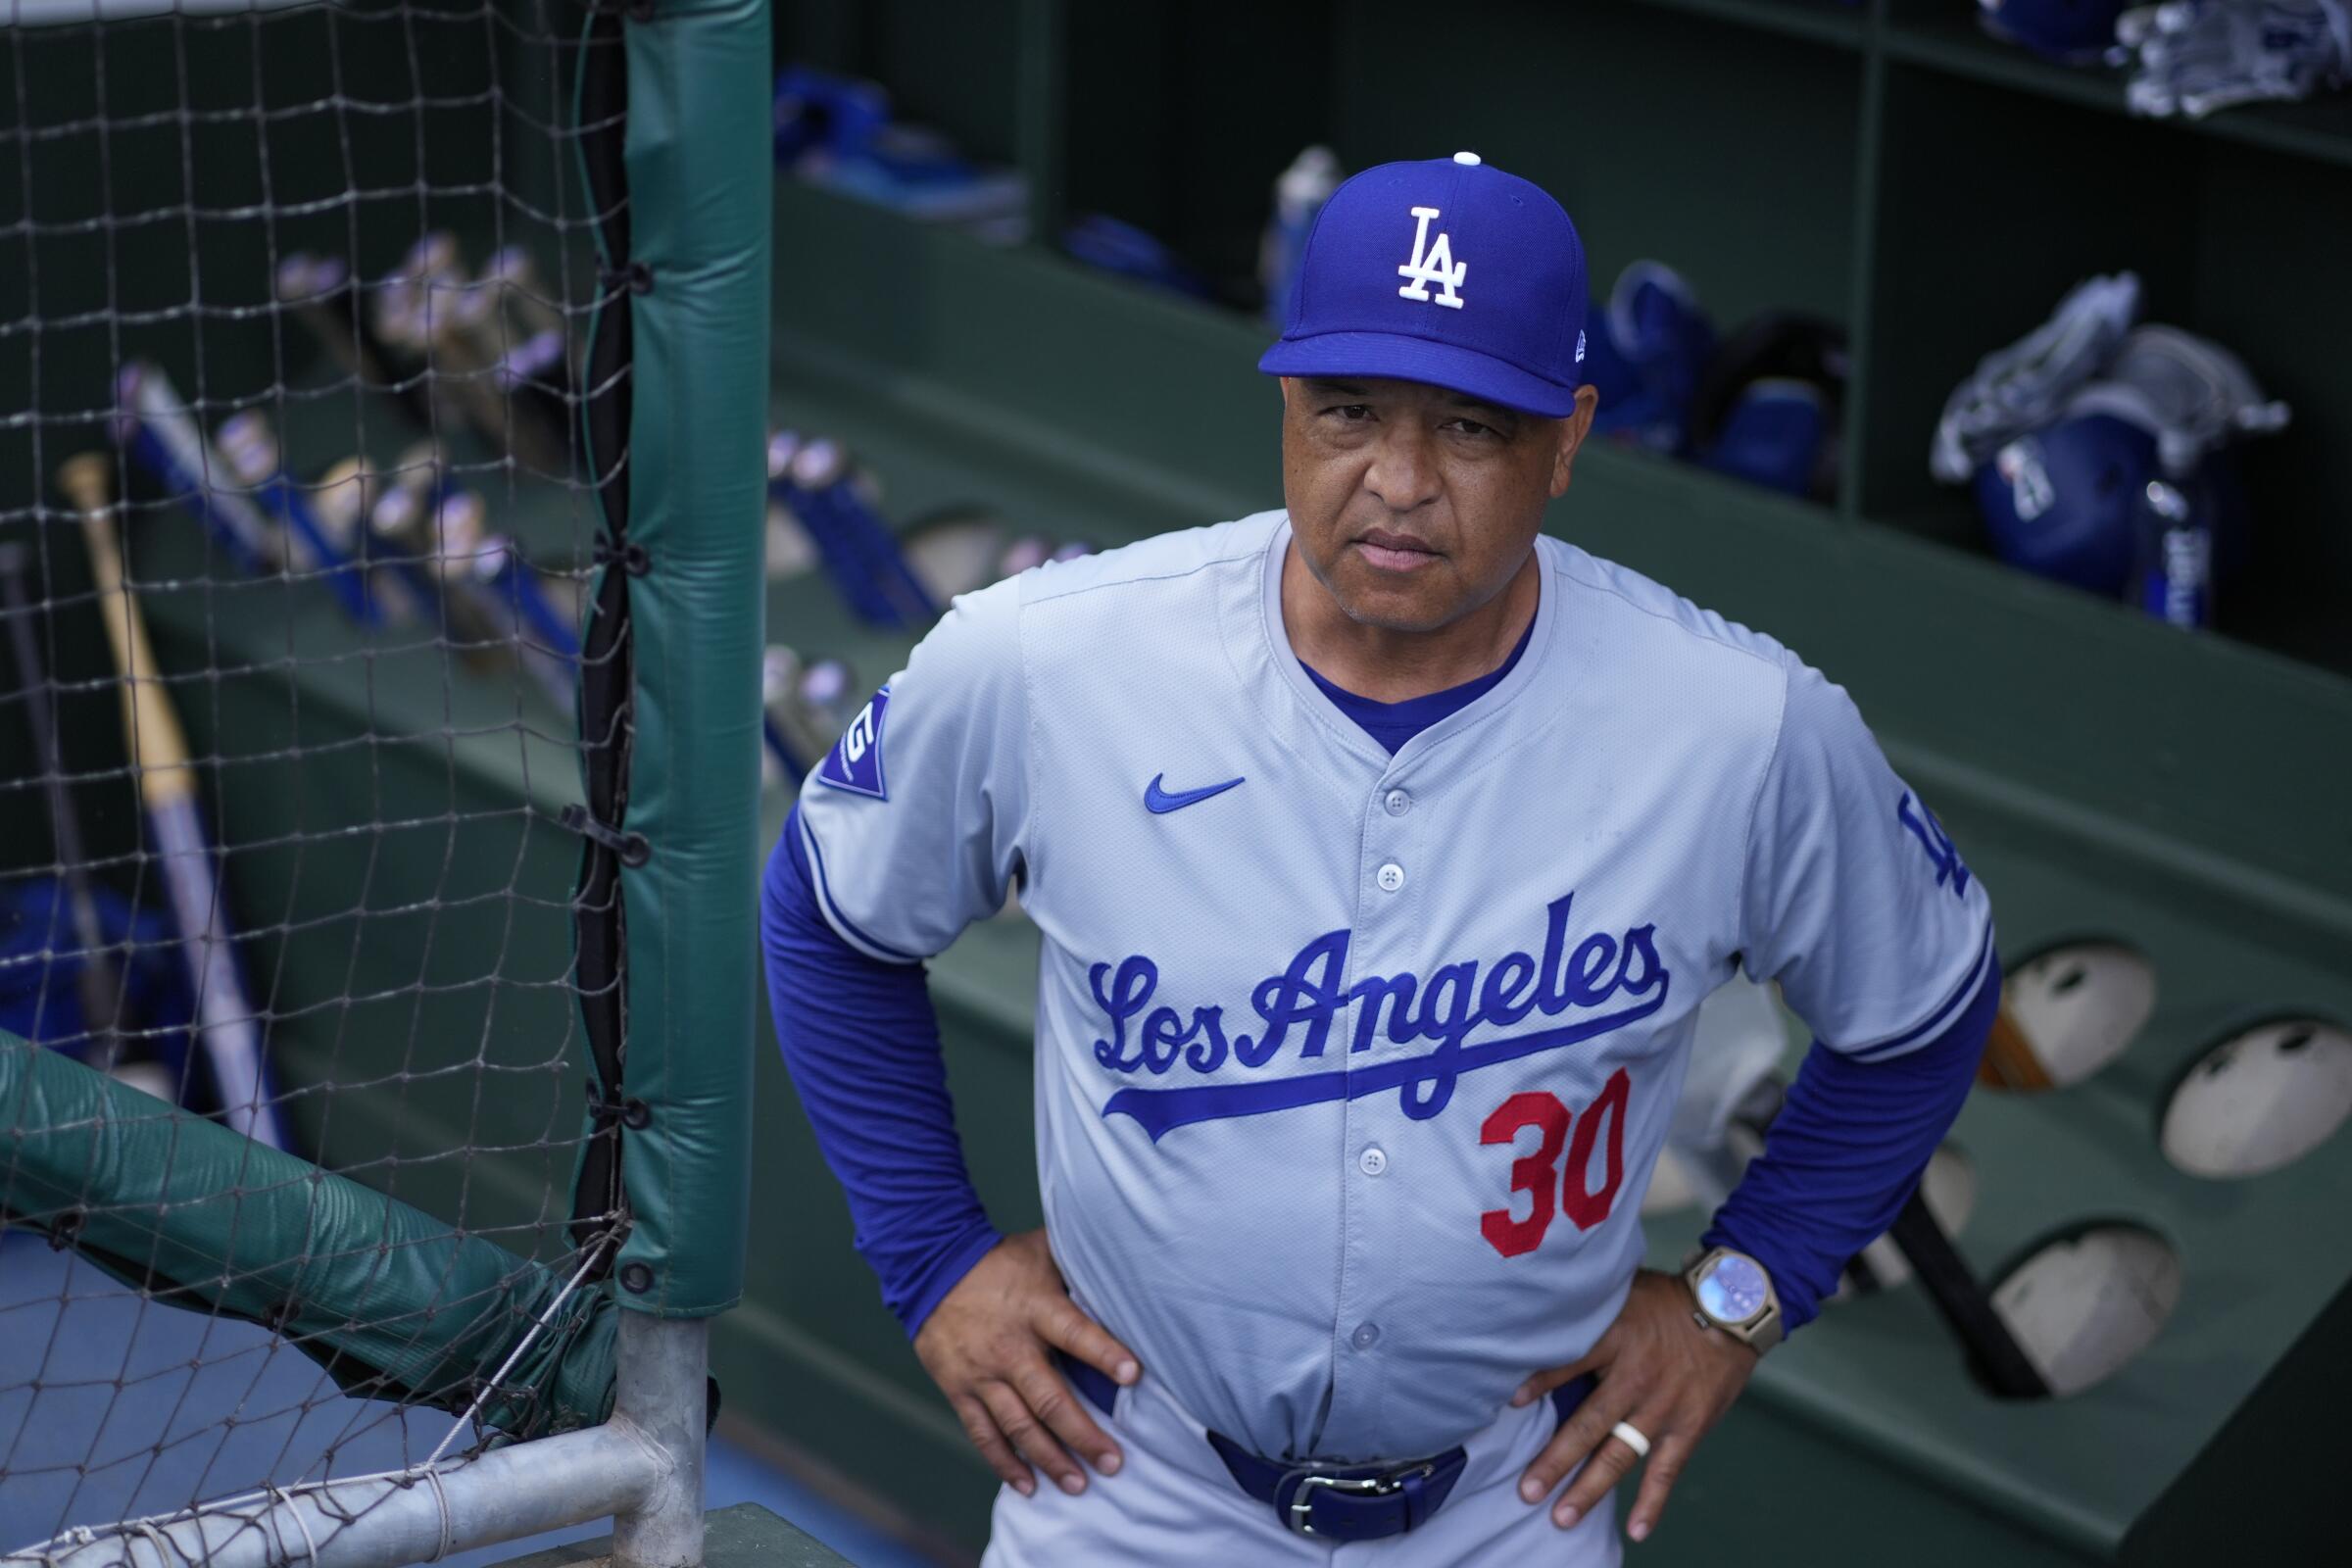 Dodgers manager Dave Roberts stands in the dugout with his hands on his hips as he watches a game.